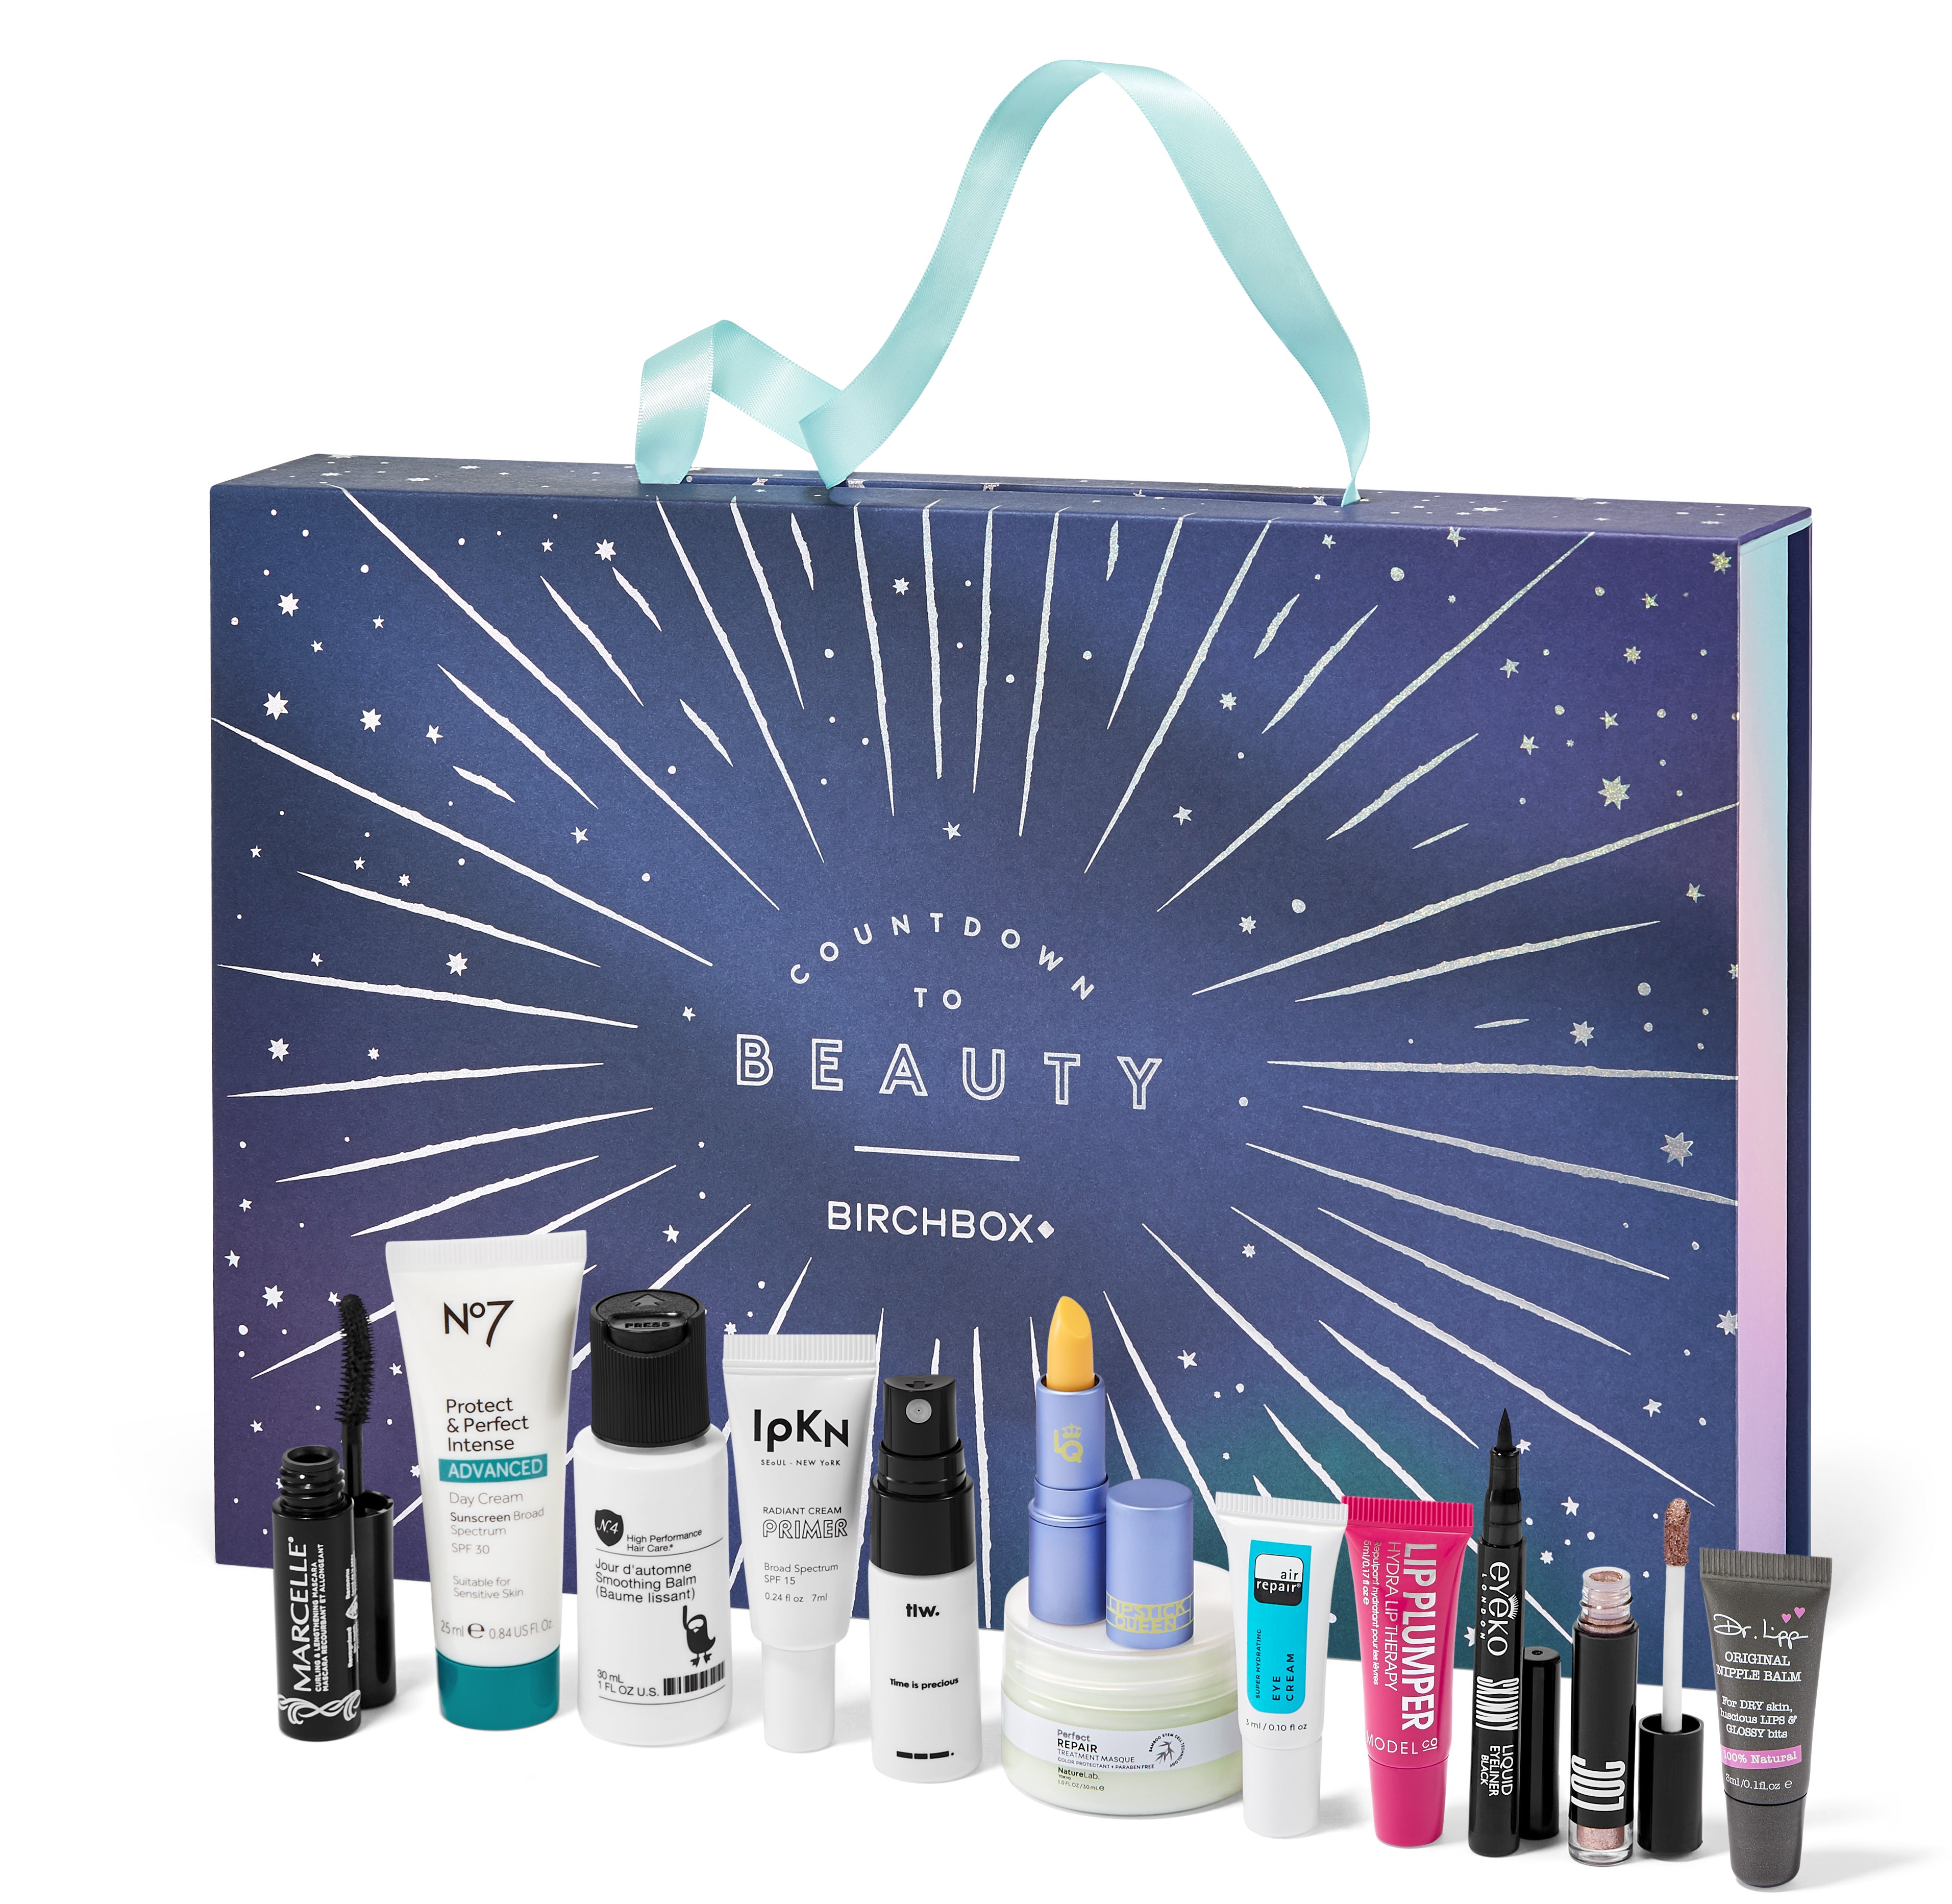 Heads Up Birchbox Advent Calendars Are Here And They’re